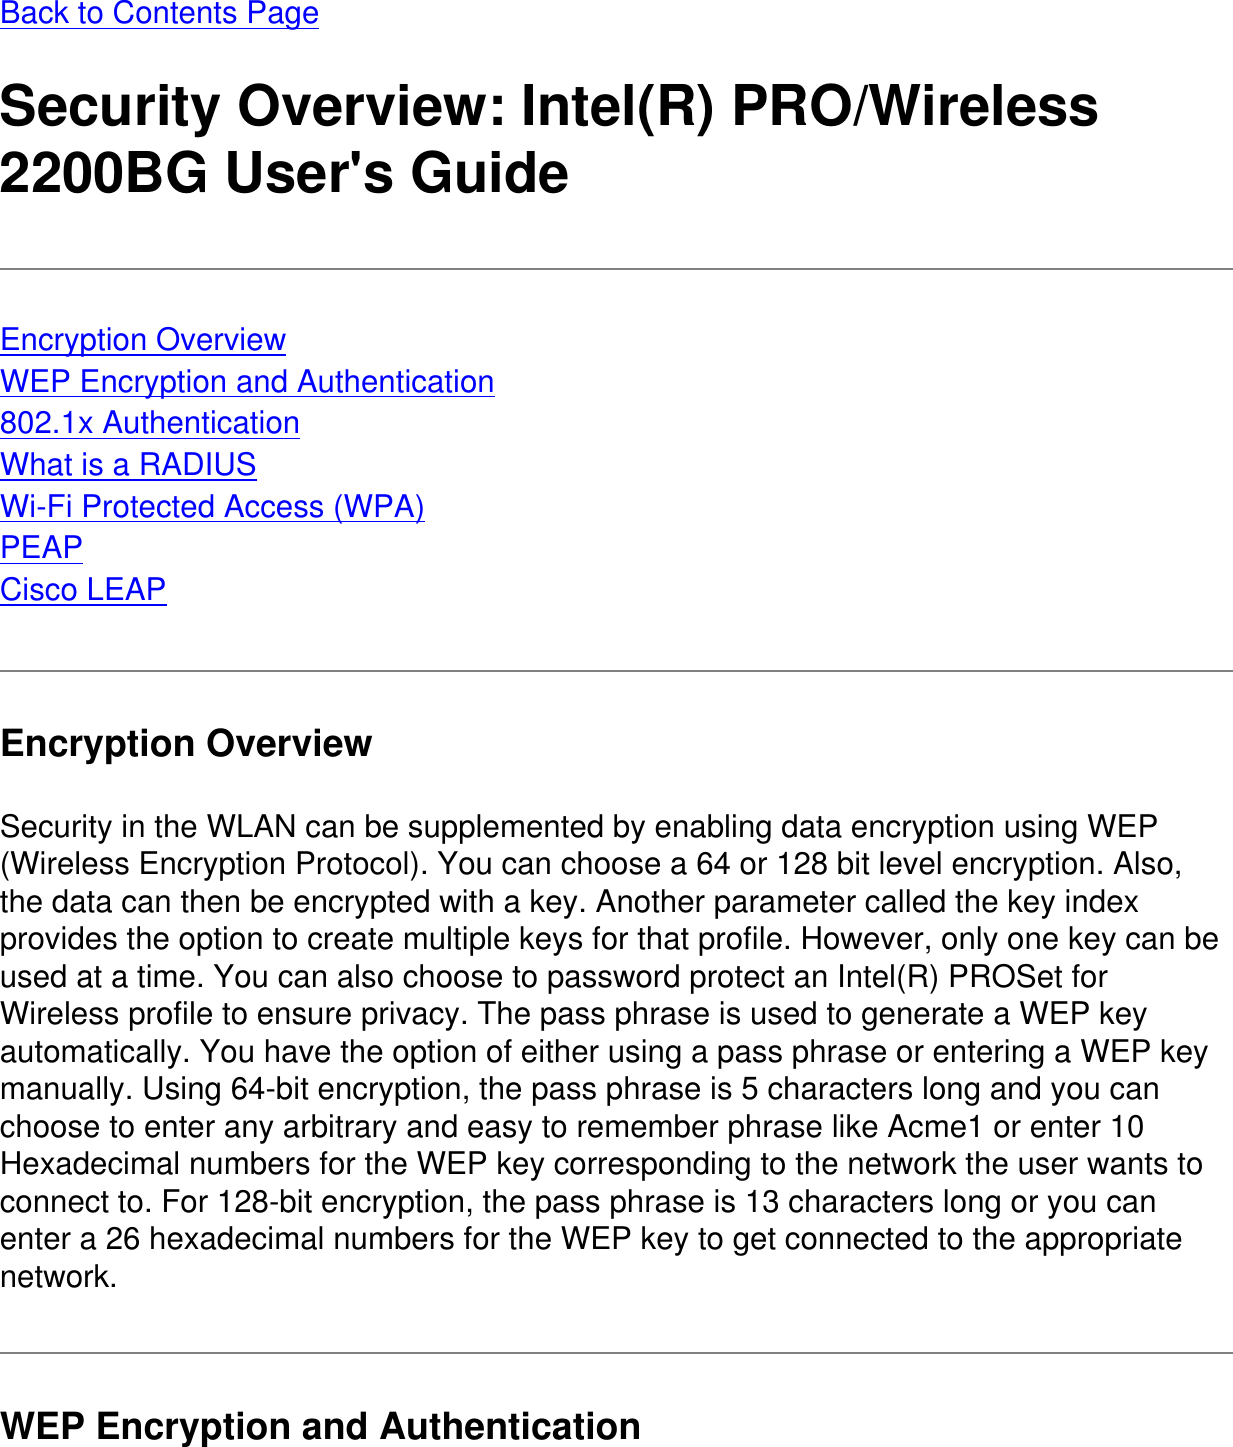 Back to Contents PageSecurity Overview: Intel(R) PRO/Wireless 2200BG User&apos;s GuideEncryption OverviewWEP Encryption and Authentication802.1x AuthenticationWhat is a RADIUSWi-Fi Protected Access (WPA)PEAPCisco LEAPEncryption OverviewSecurity in the WLAN can be supplemented by enabling data encryption using WEP (Wireless Encryption Protocol). You can choose a 64 or 128 bit level encryption. Also, the data can then be encrypted with a key. Another parameter called the key index provides the option to create multiple keys for that profile. However, only one key can be used at a time. You can also choose to password protect an Intel(R) PROSet for Wireless profile to ensure privacy. The pass phrase is used to generate a WEP key automatically. You have the option of either using a pass phrase or entering a WEP key manually. Using 64-bit encryption, the pass phrase is 5 characters long and you can choose to enter any arbitrary and easy to remember phrase like Acme1 or enter 10 Hexadecimal numbers for the WEP key corresponding to the network the user wants to connect to. For 128-bit encryption, the pass phrase is 13 characters long or you can enter a 26 hexadecimal numbers for the WEP key to get connected to the appropriate network.WEP Encryption and Authentication